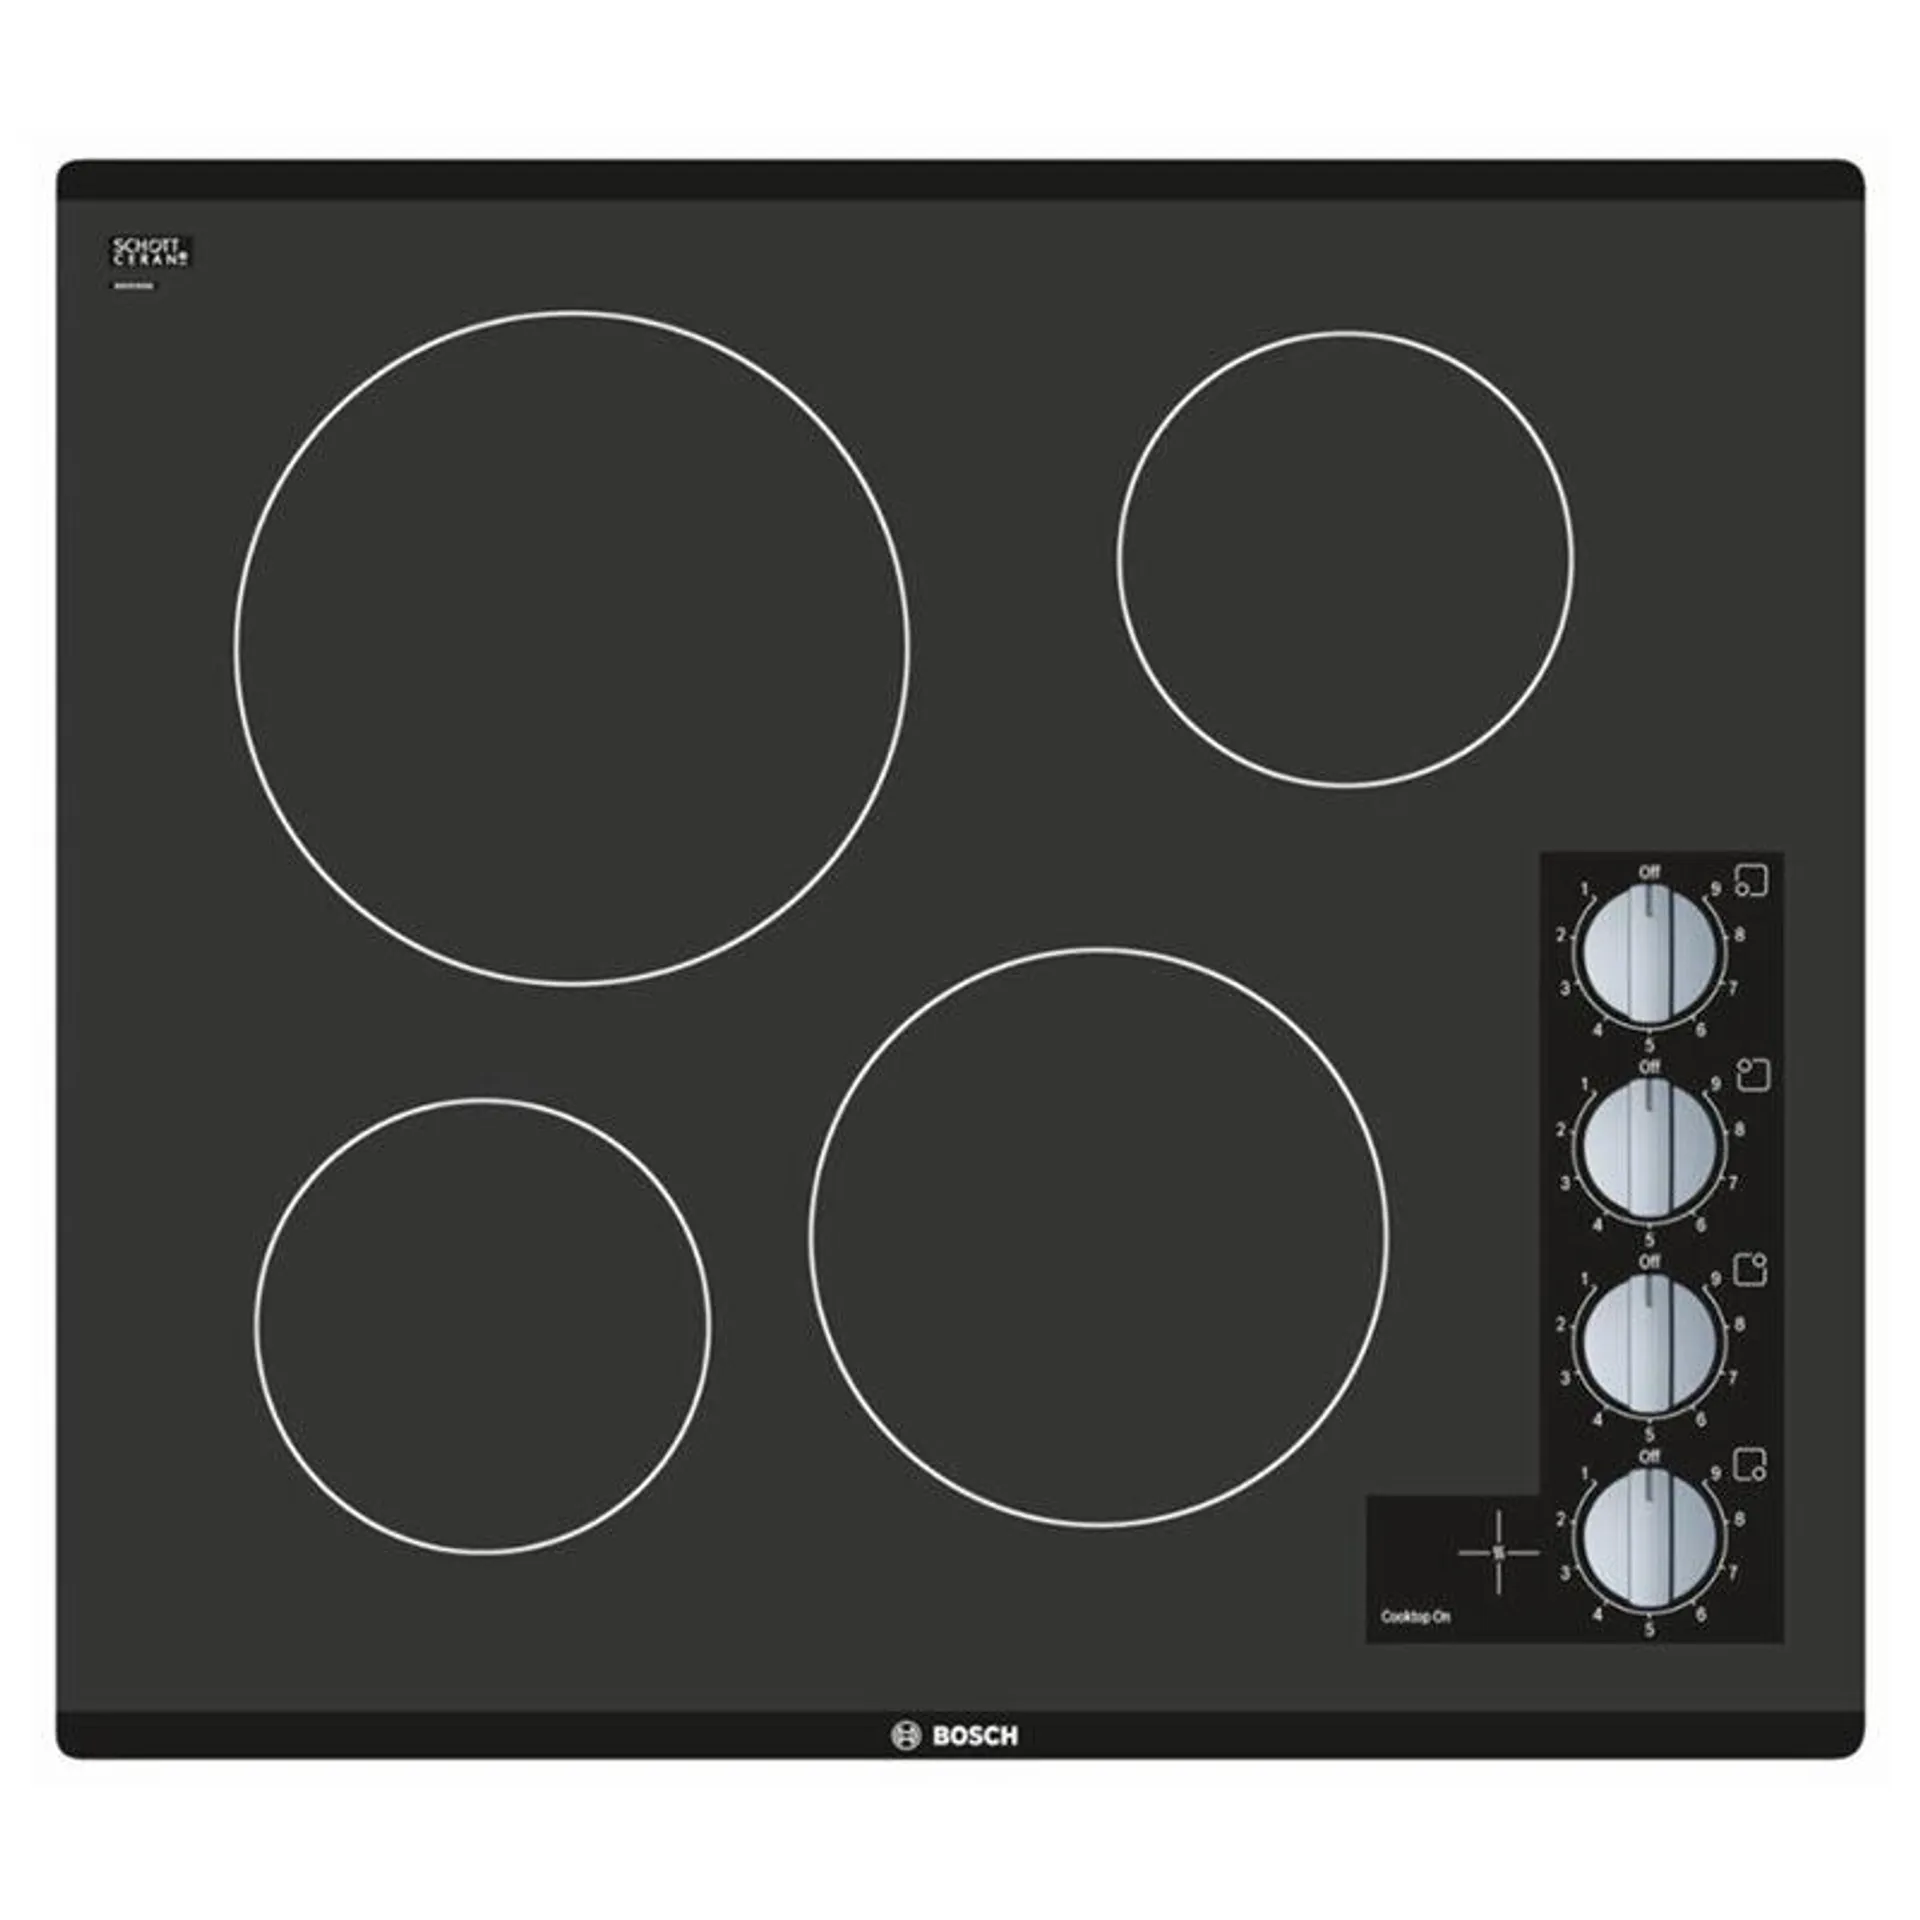 Bosch 500 Series 24" Electric Cooktop with 4 Smoothtop Burners & Easy Cleaning - Black